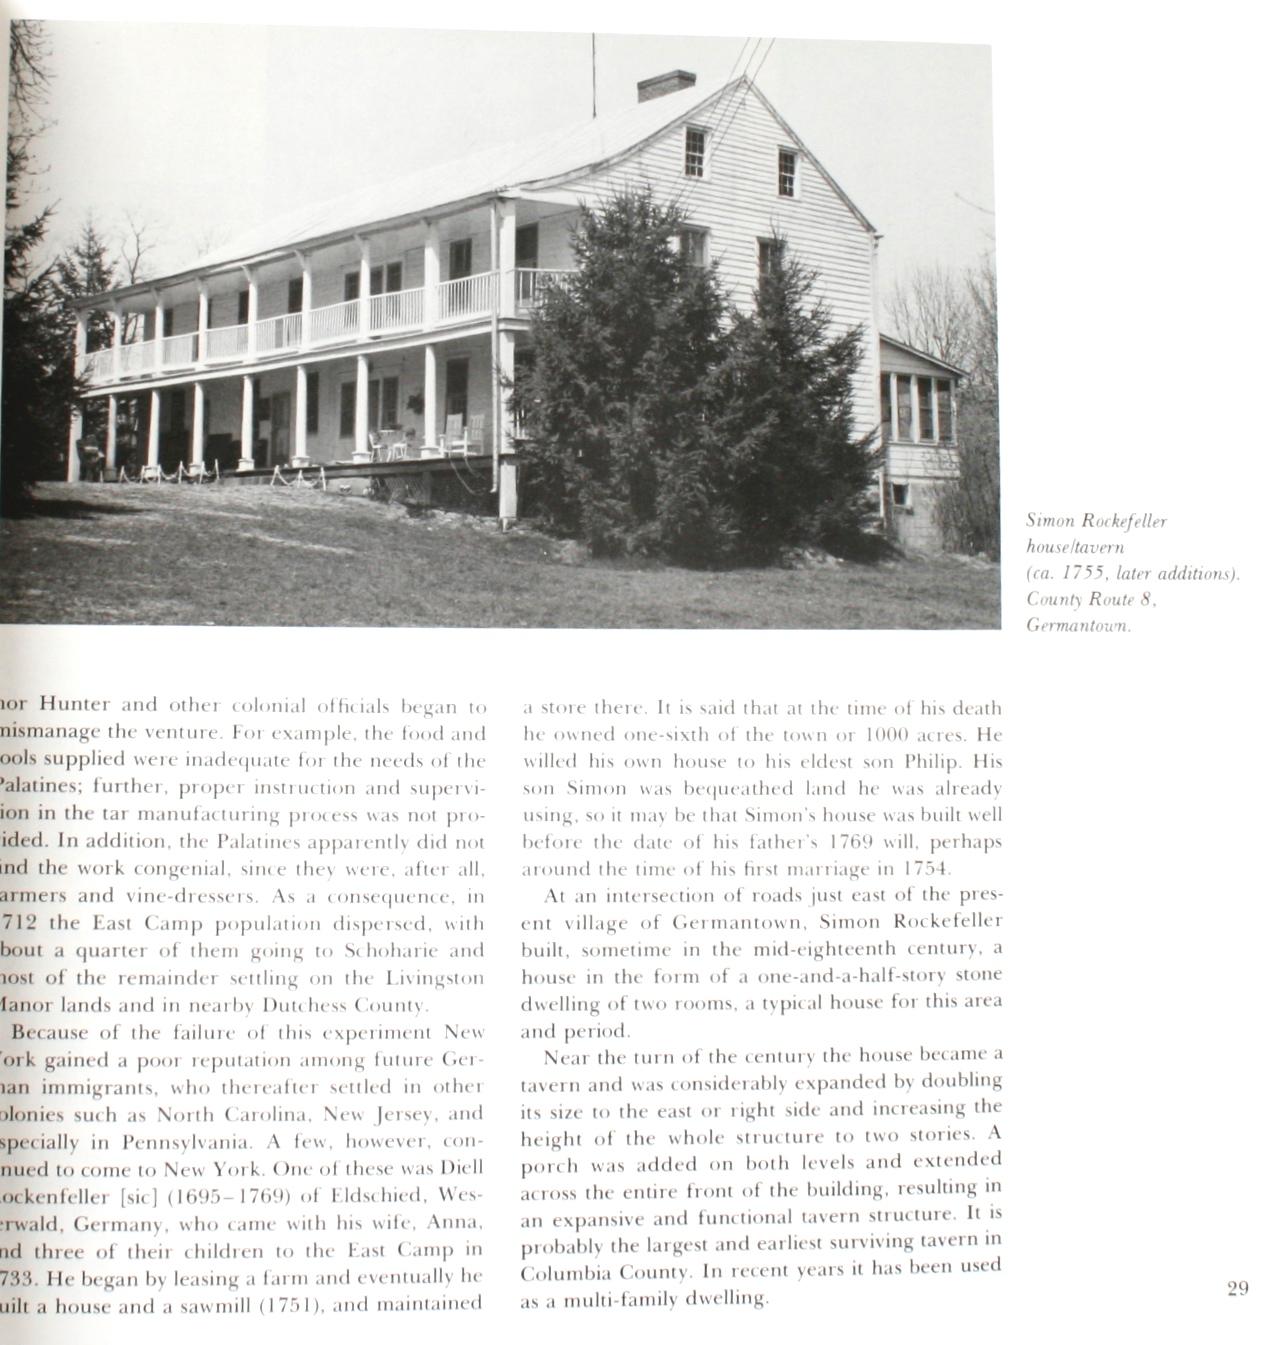 Paper Visible Heritage-Columbia County NY, a History in Art and Architectucture, 1st